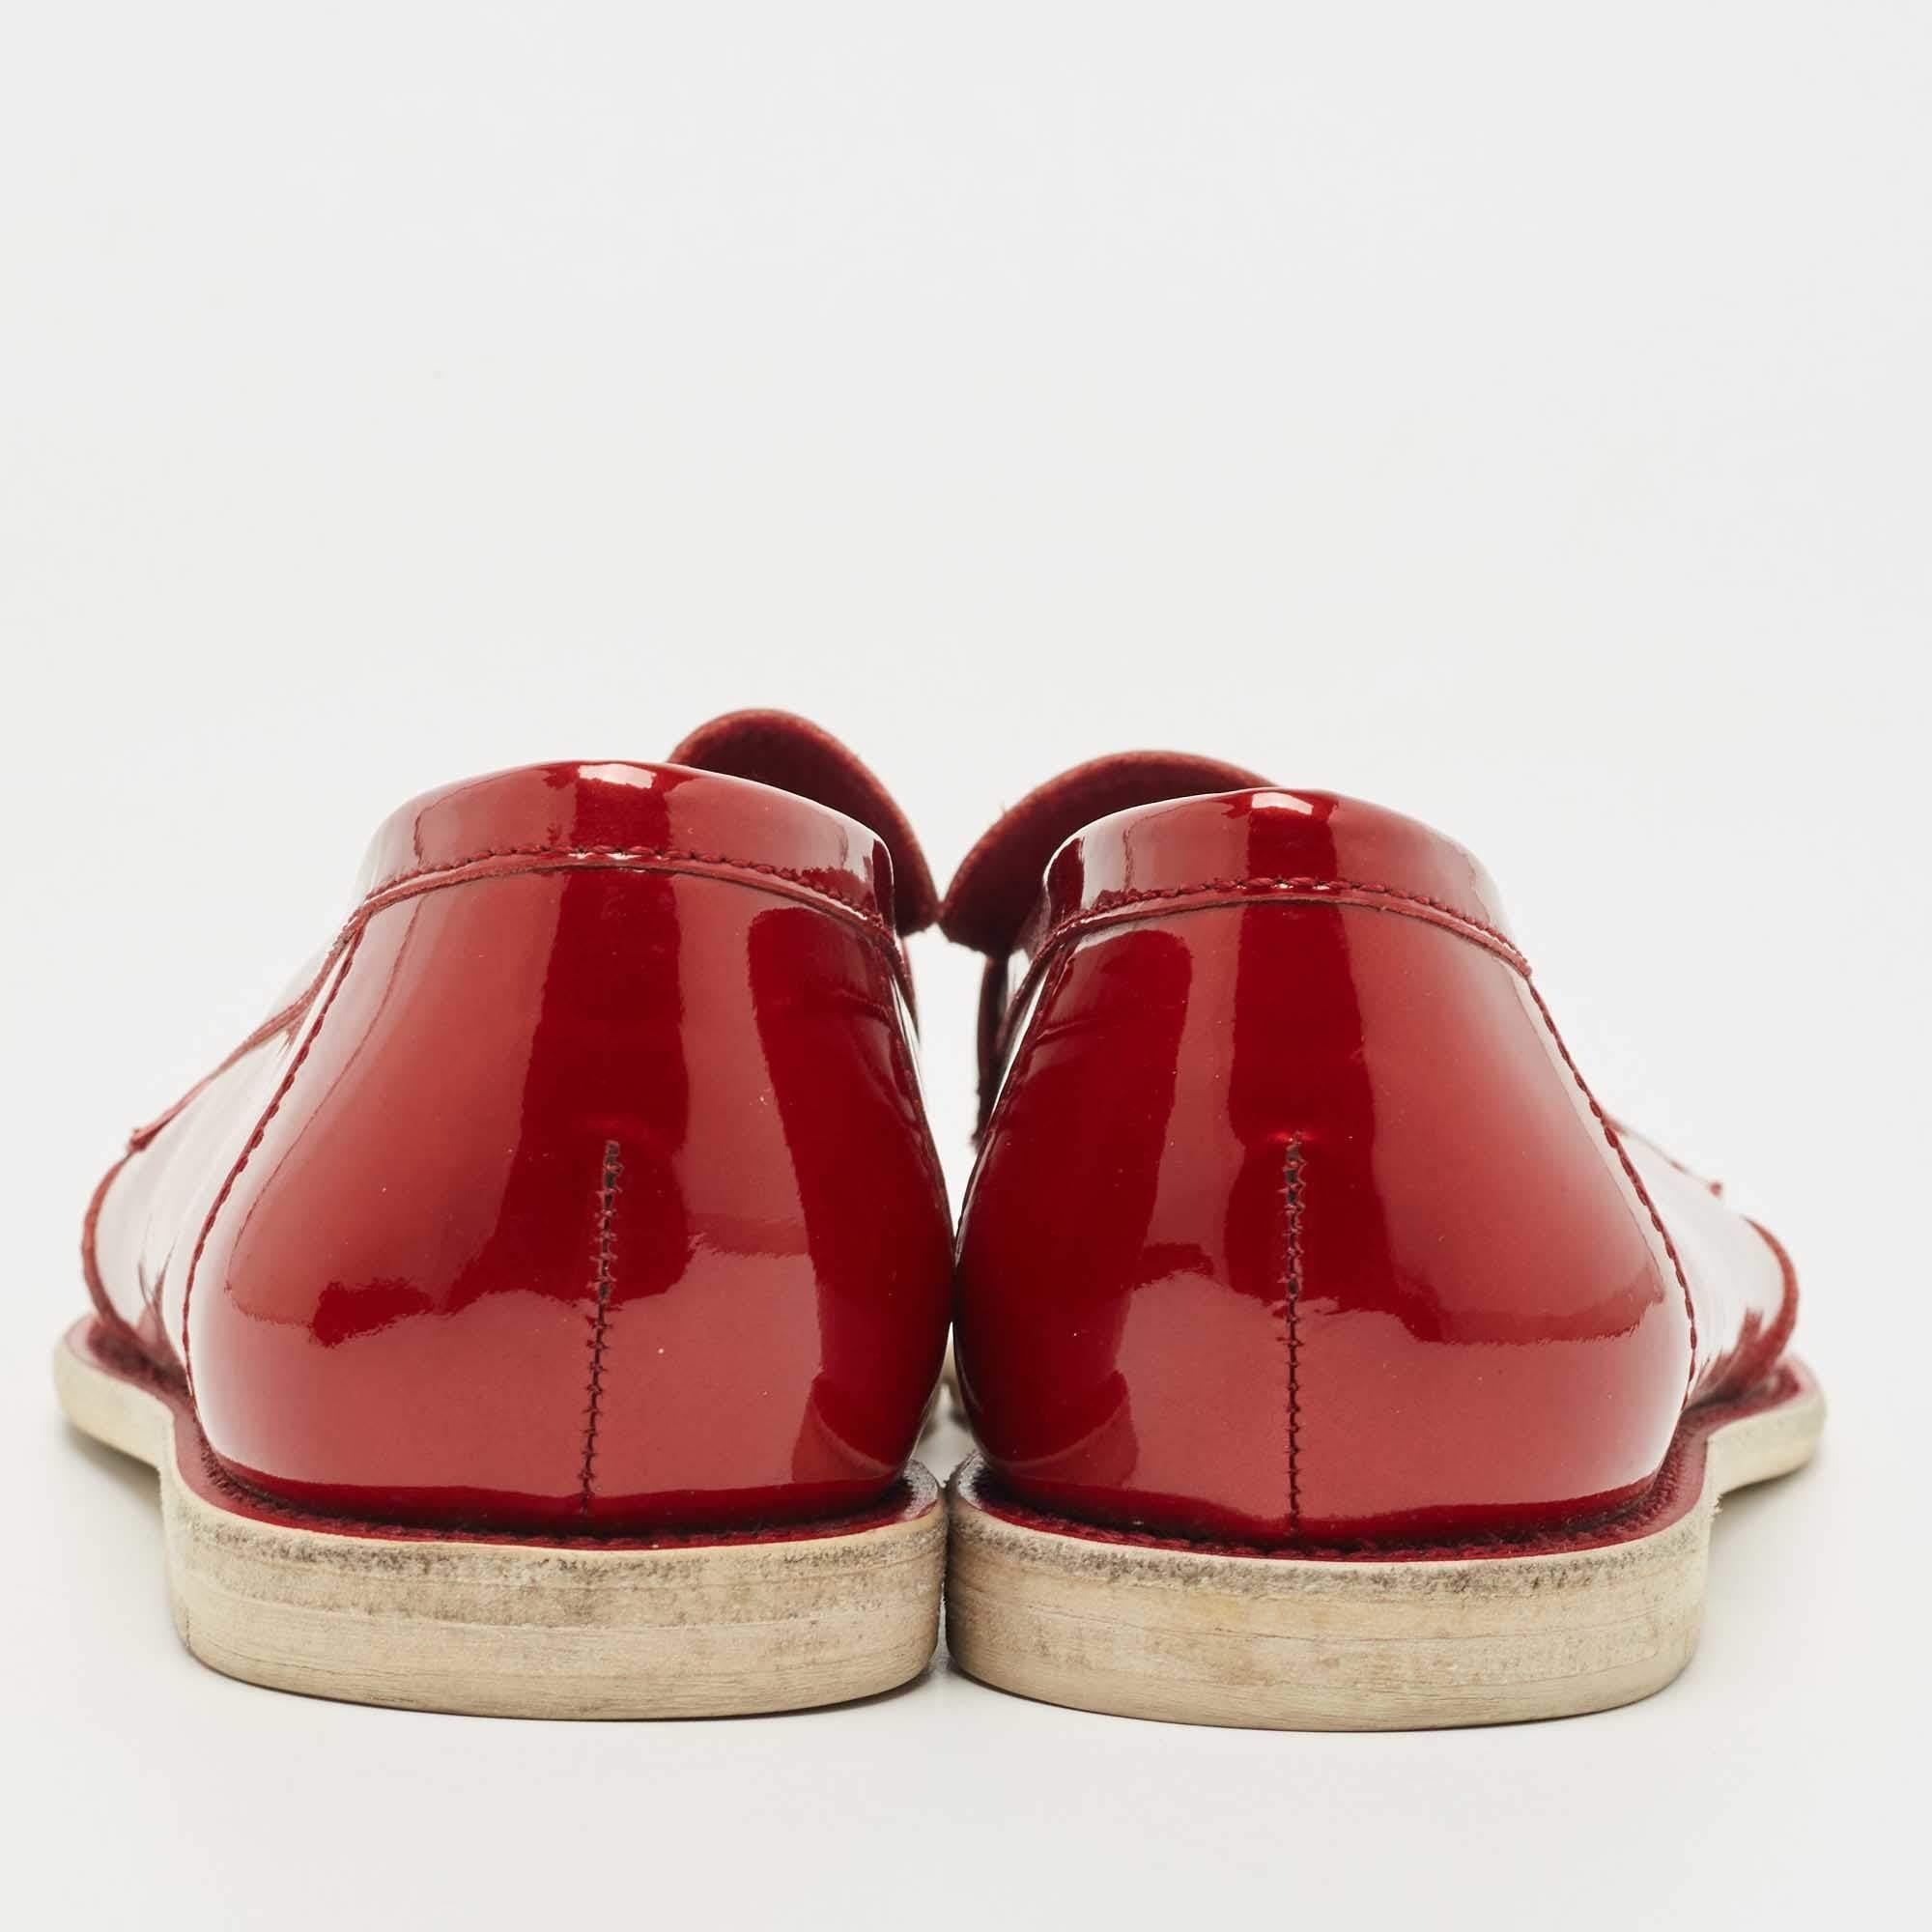 Chanel Red Patent Leather CC Loafers Size 37.5 1